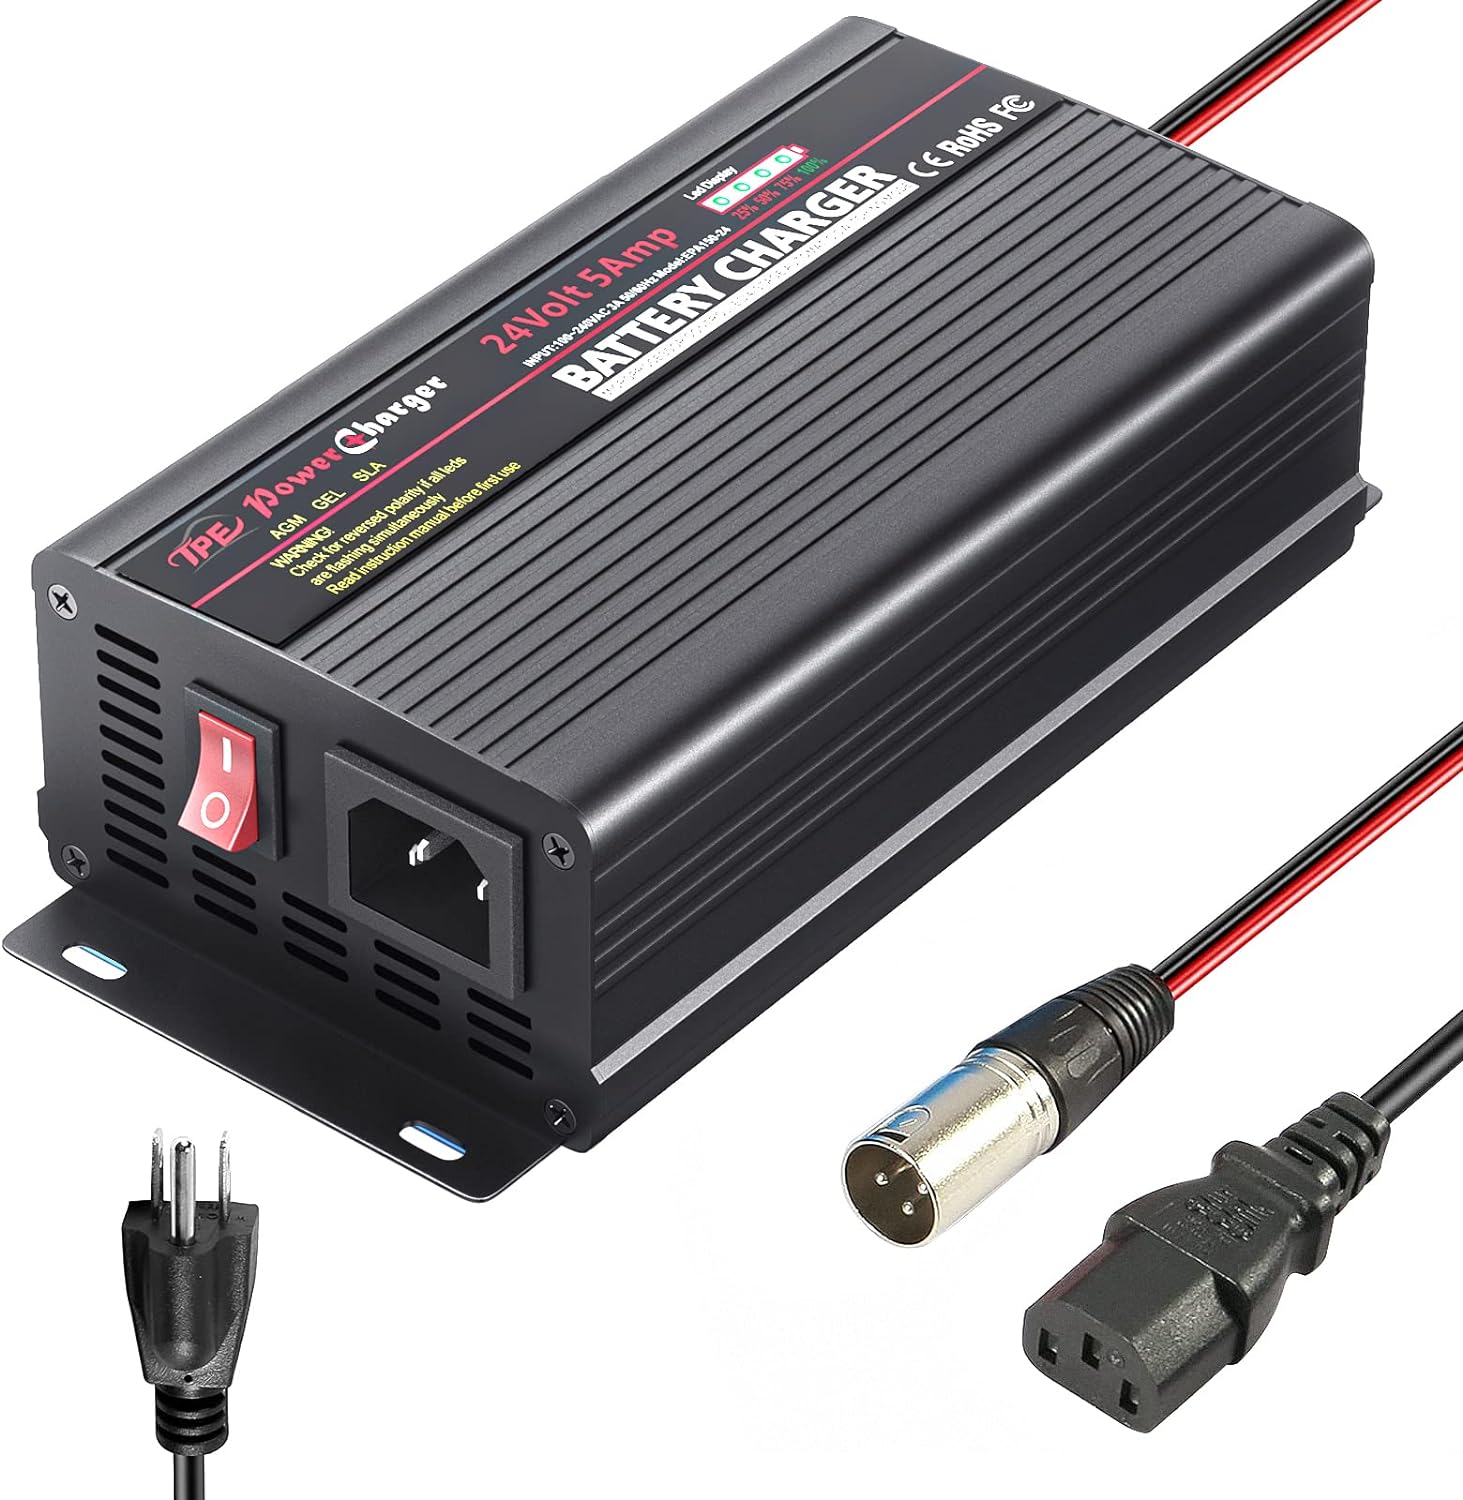 24V 5Amp Battery Charger Review